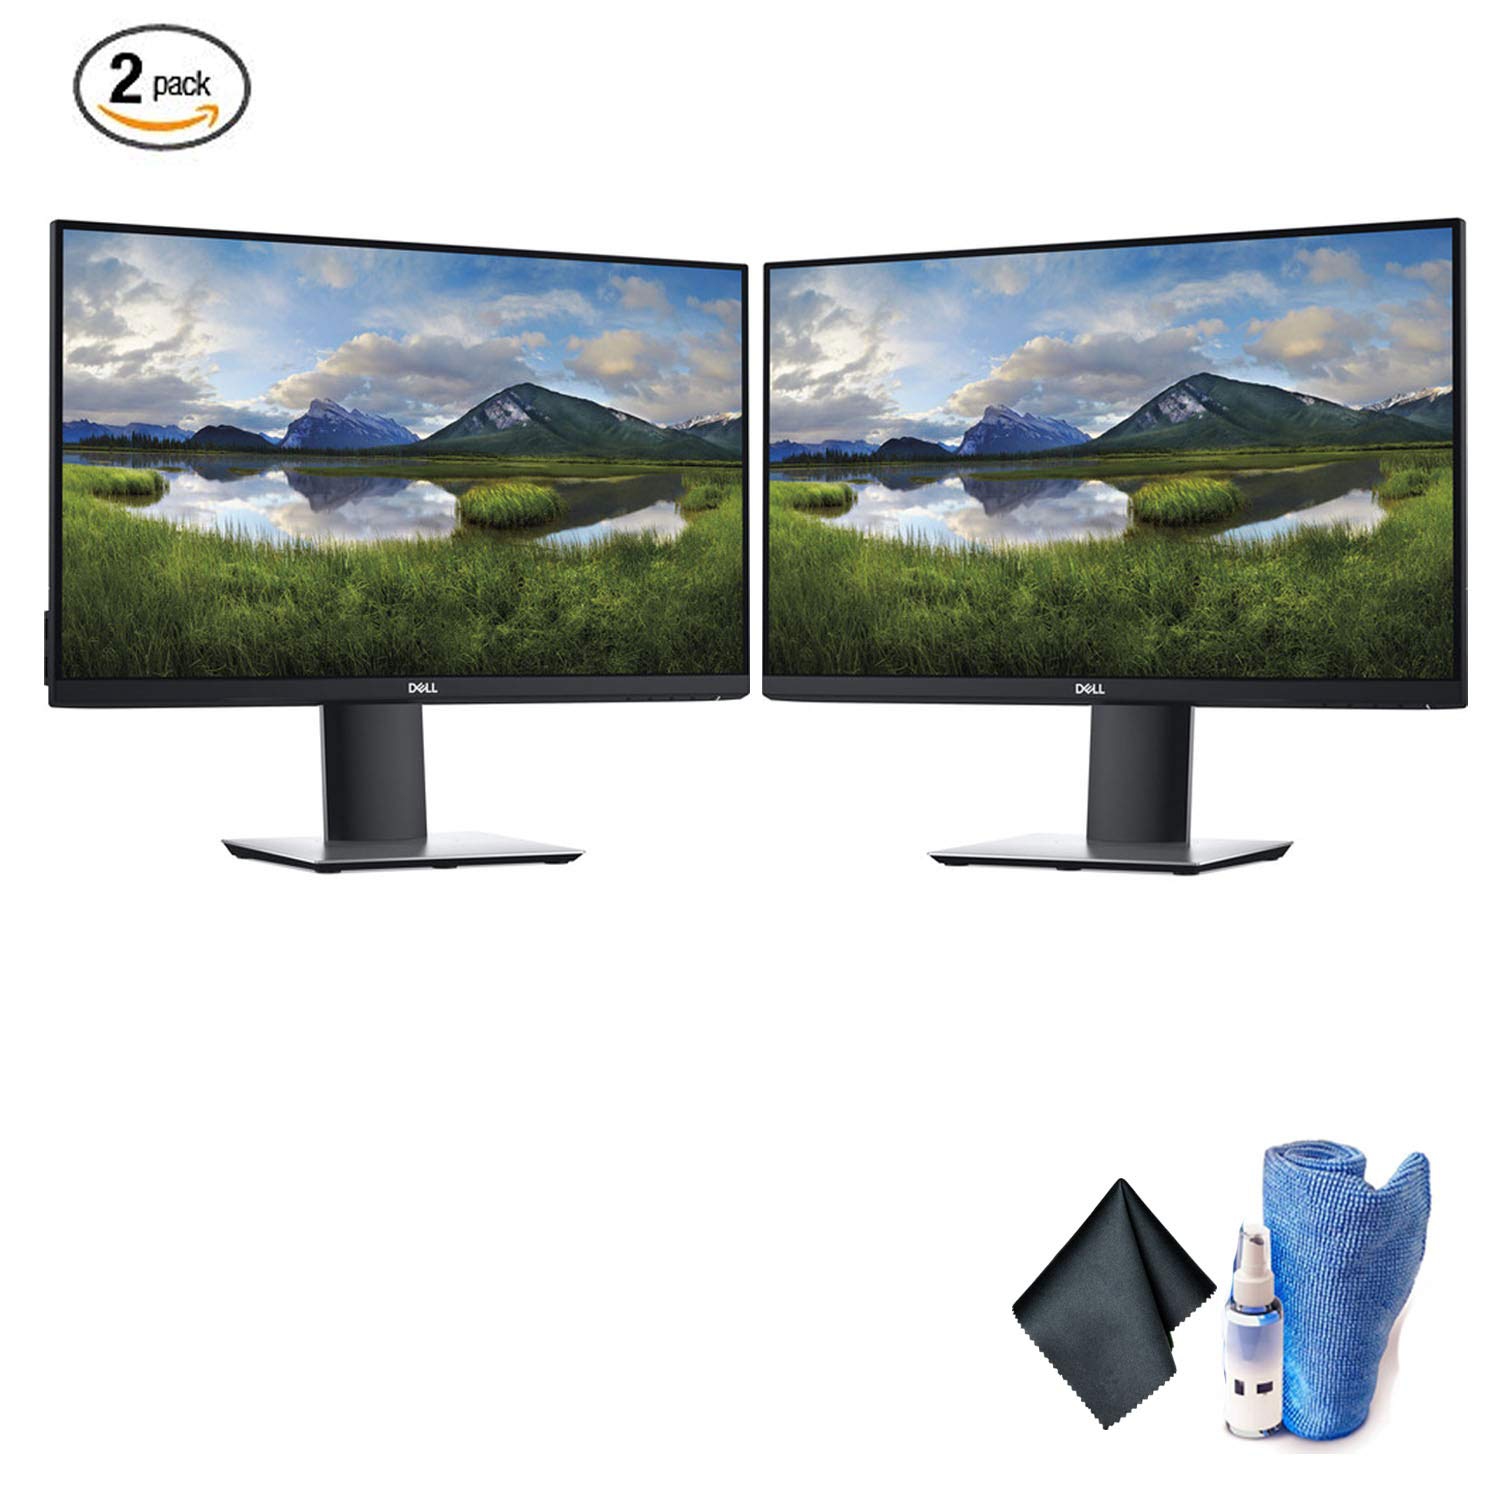 Dell P2419H 24 Inch 16:9 Ultrathin Bezel IPS Computer Monitor - Bundle with 2 Screens